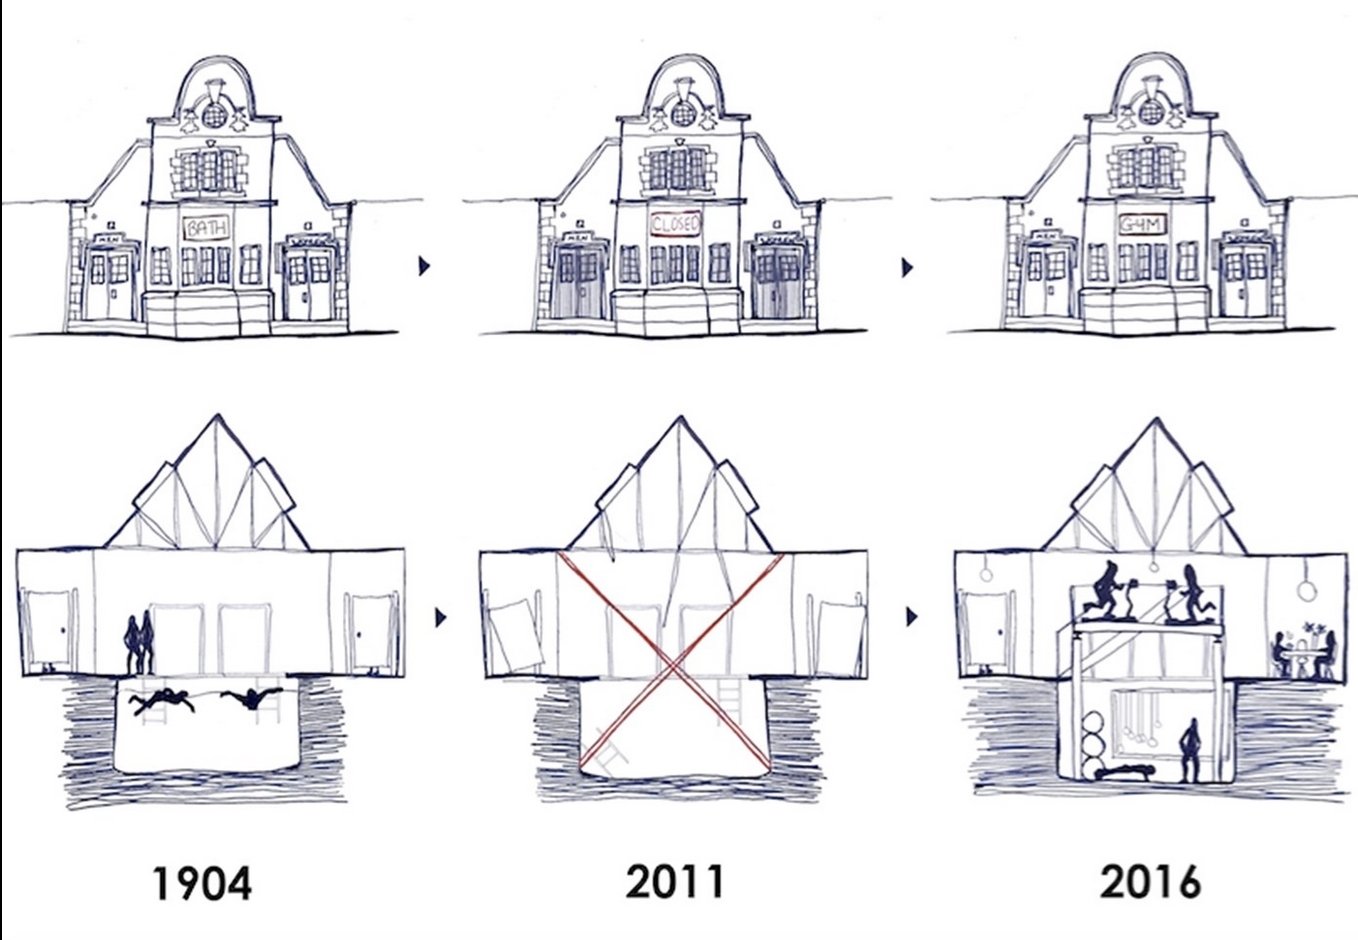 Three sketches of a building showing how it changed between 1904 and 2016